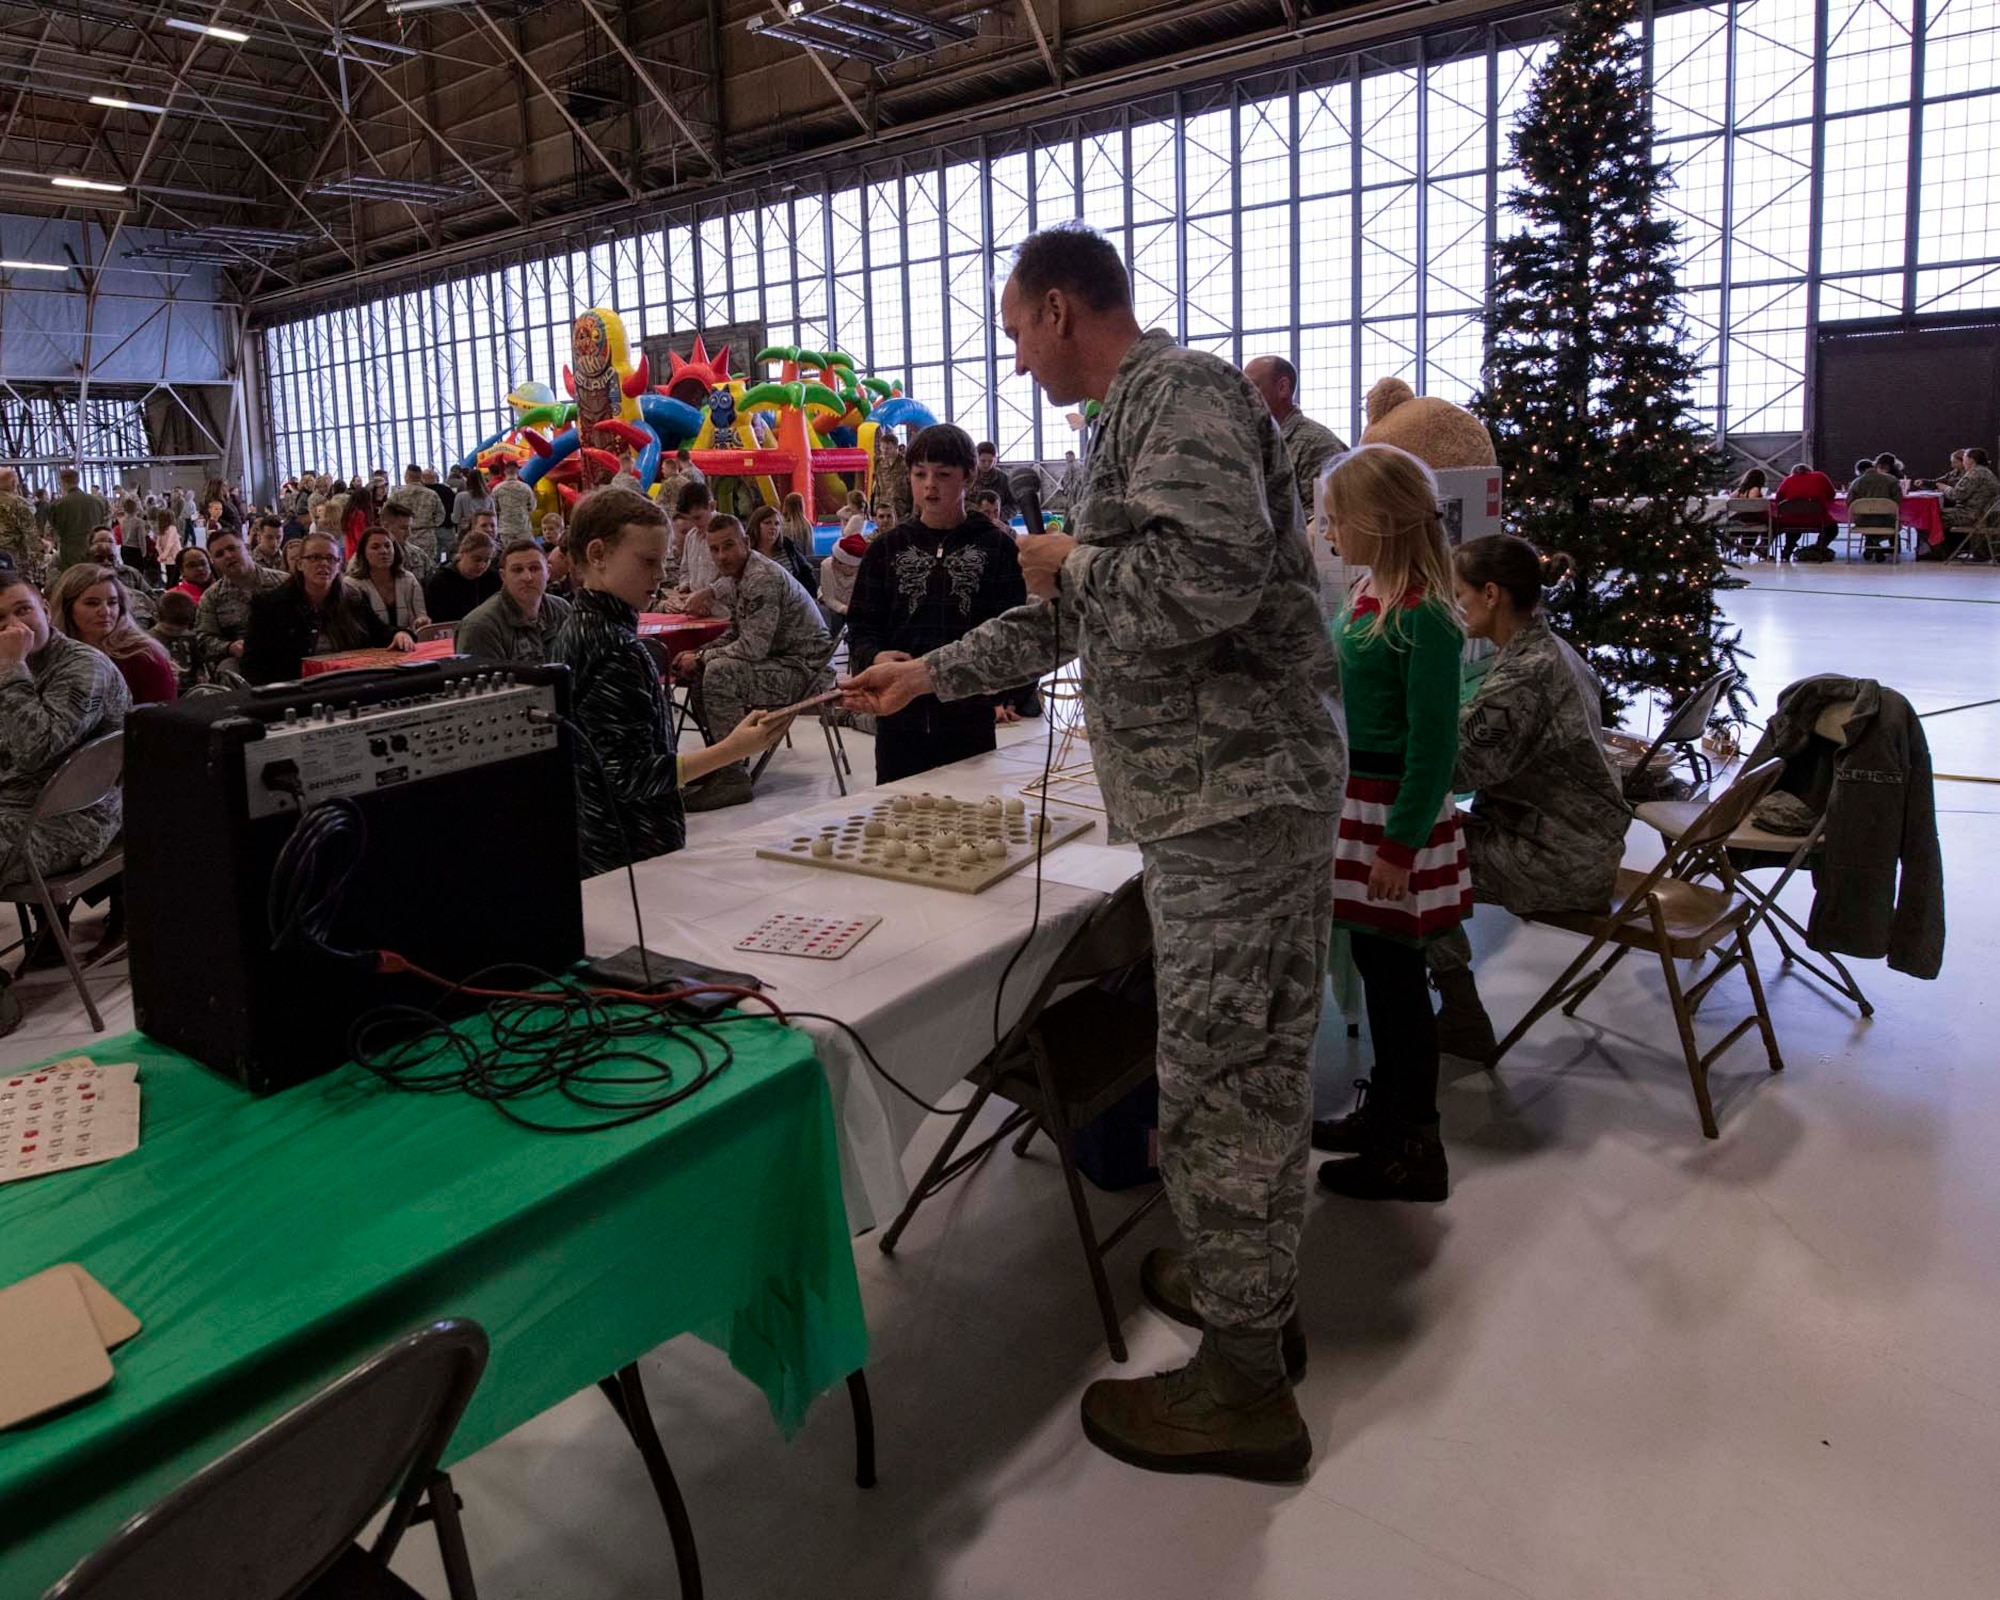 Col. Johan Deutscher, commander of the 141st Air Refueling Wing, checks bingo cards during the wing’s annual Winter Fest Dec. 1, 2018 at Fairchild Air Force Base, Wash. More than 900 Airmen assigned to the 141st are welcome to take part in the festivities along with their families to celebrate the holiday season. (U.S. Air National Guard photo by Staff Sgt. Rose M. Lust/Released)